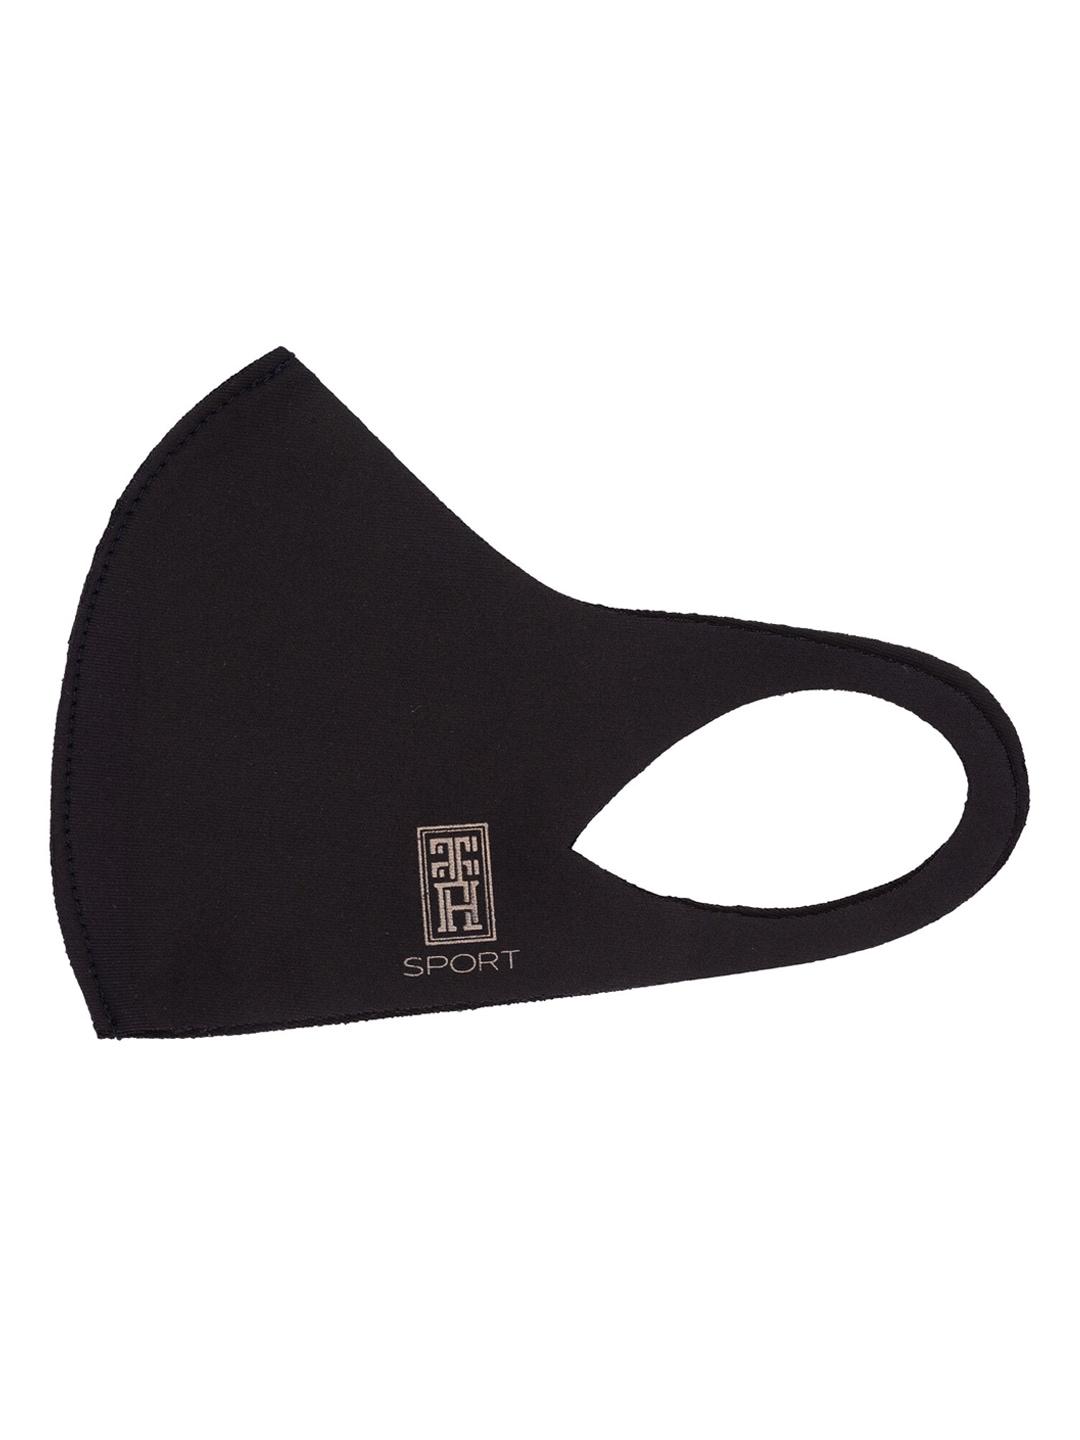 The Tie Hub Unisex Kids Black Solid 1-Ply Reusable Neo Sports Cloth Mask